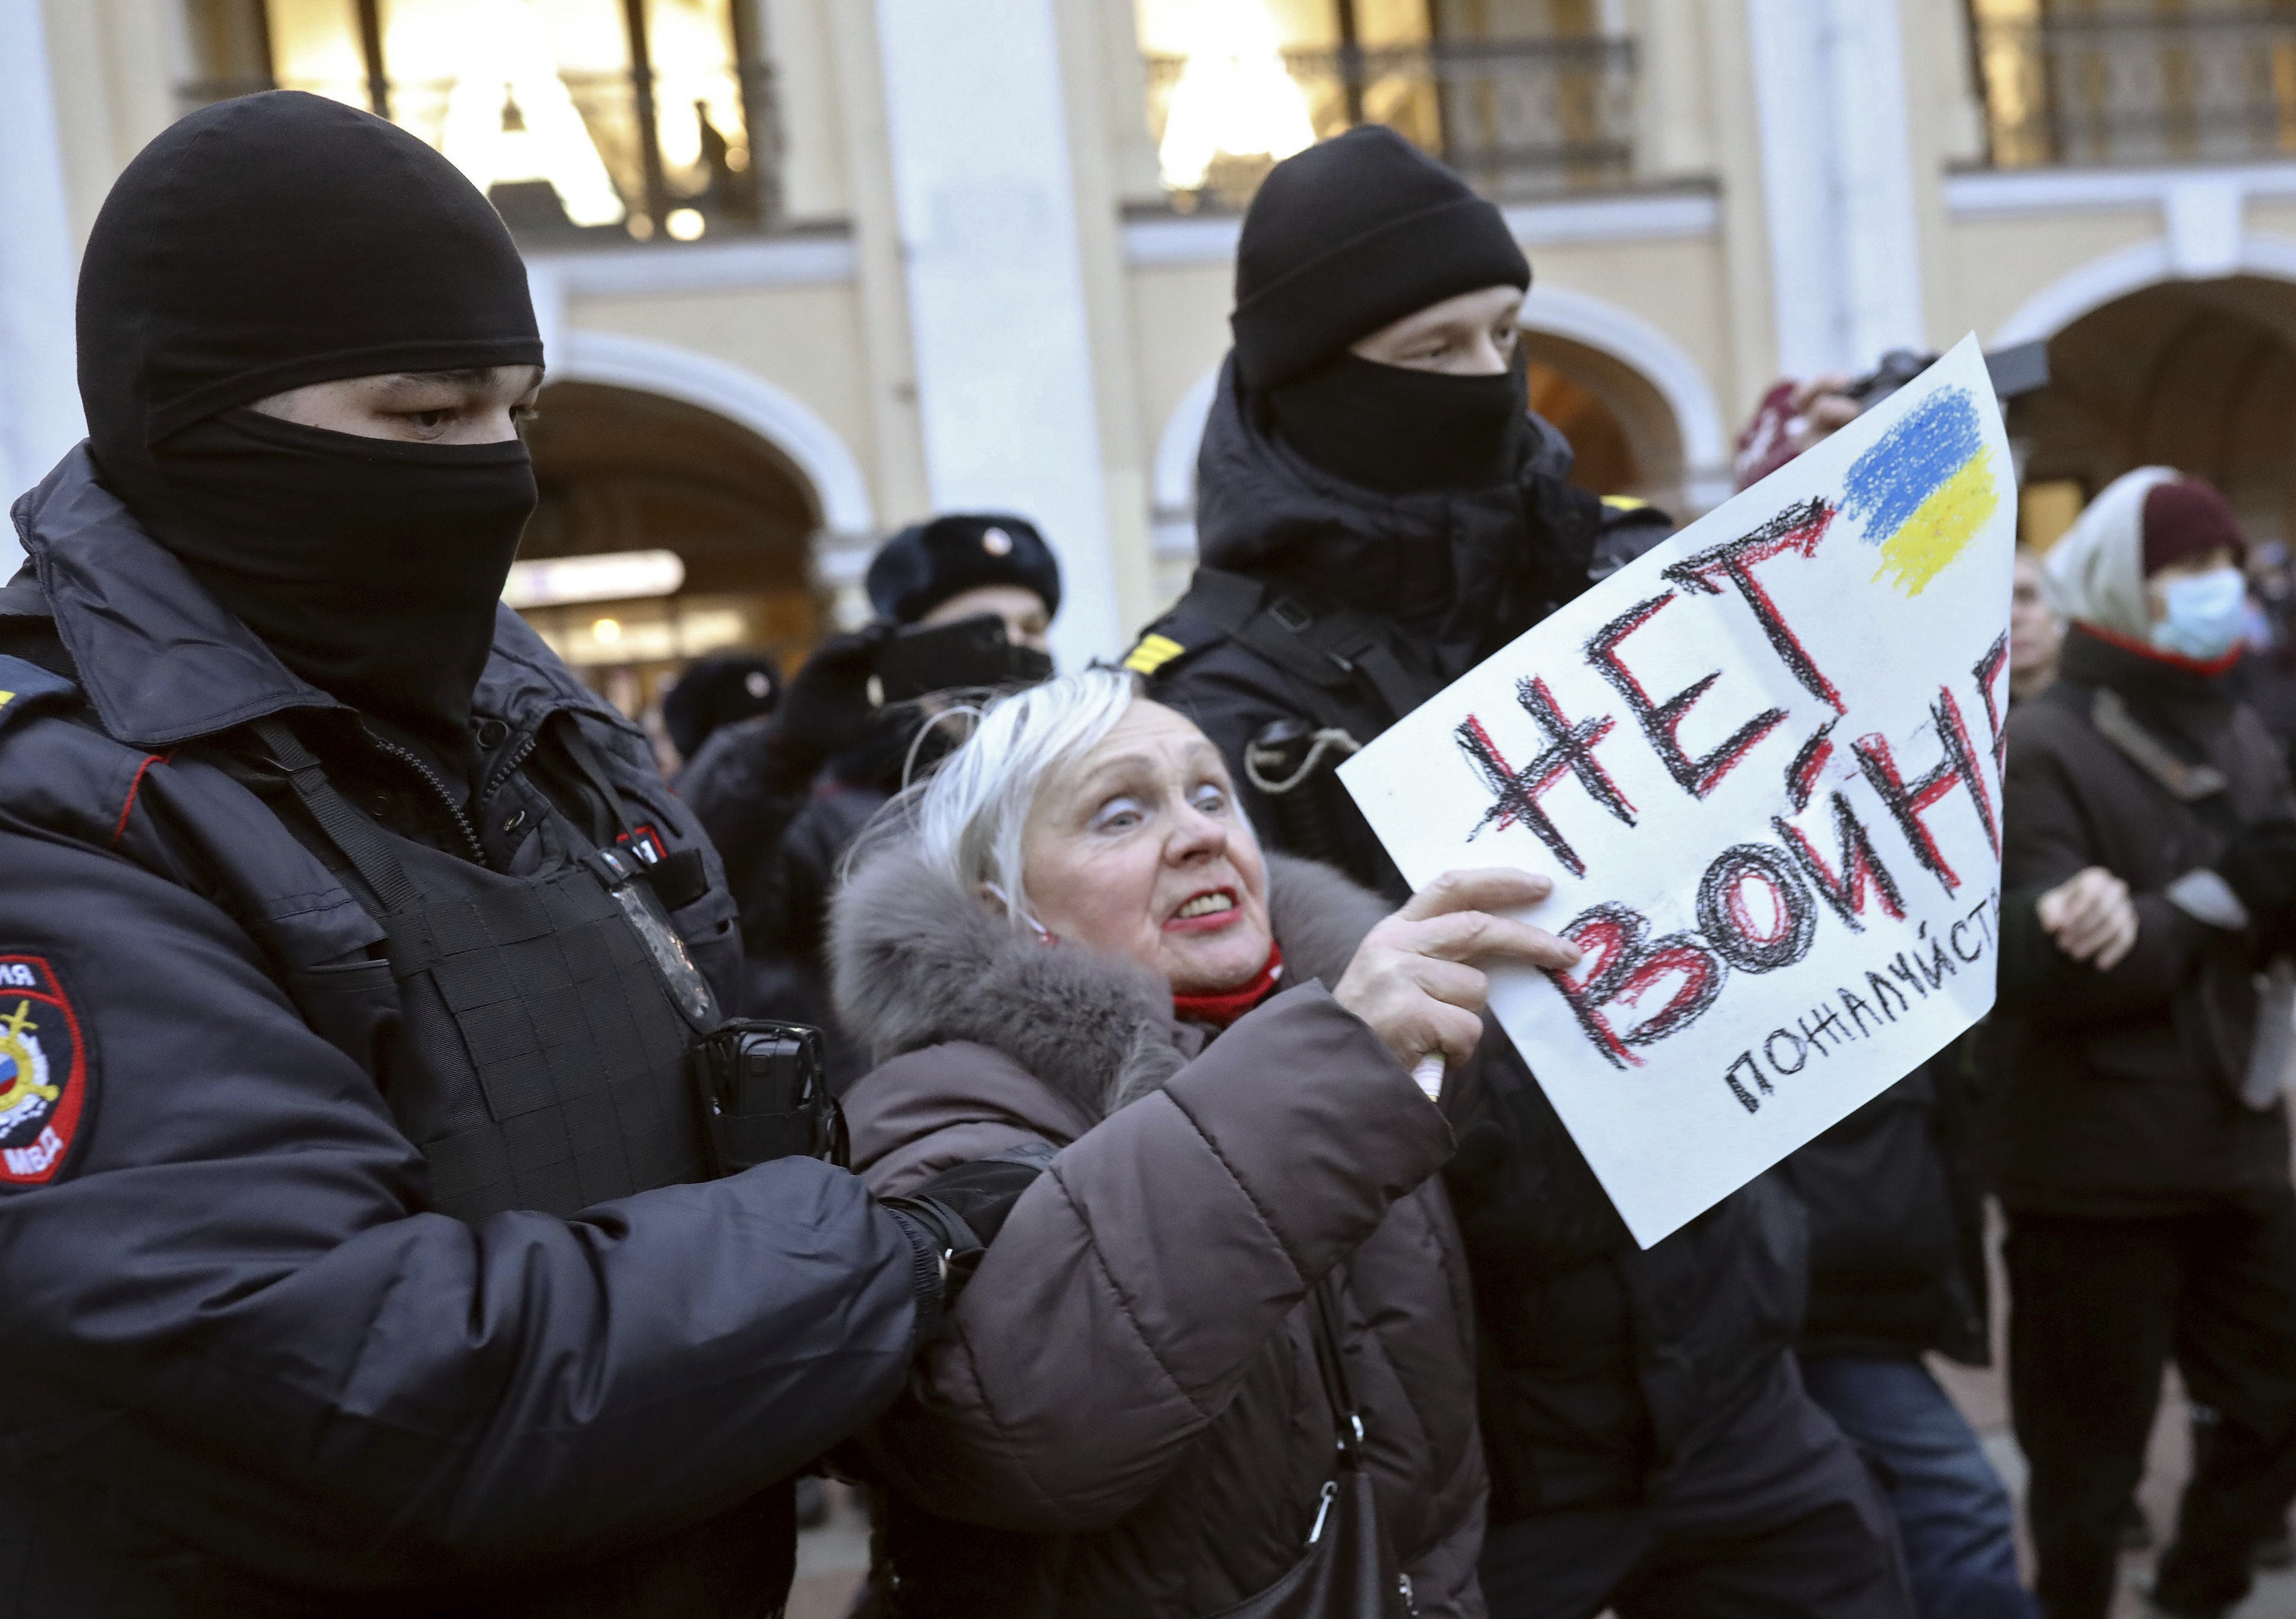 An older woman holding a sign in Russian is handled by police wearing balaclavas.